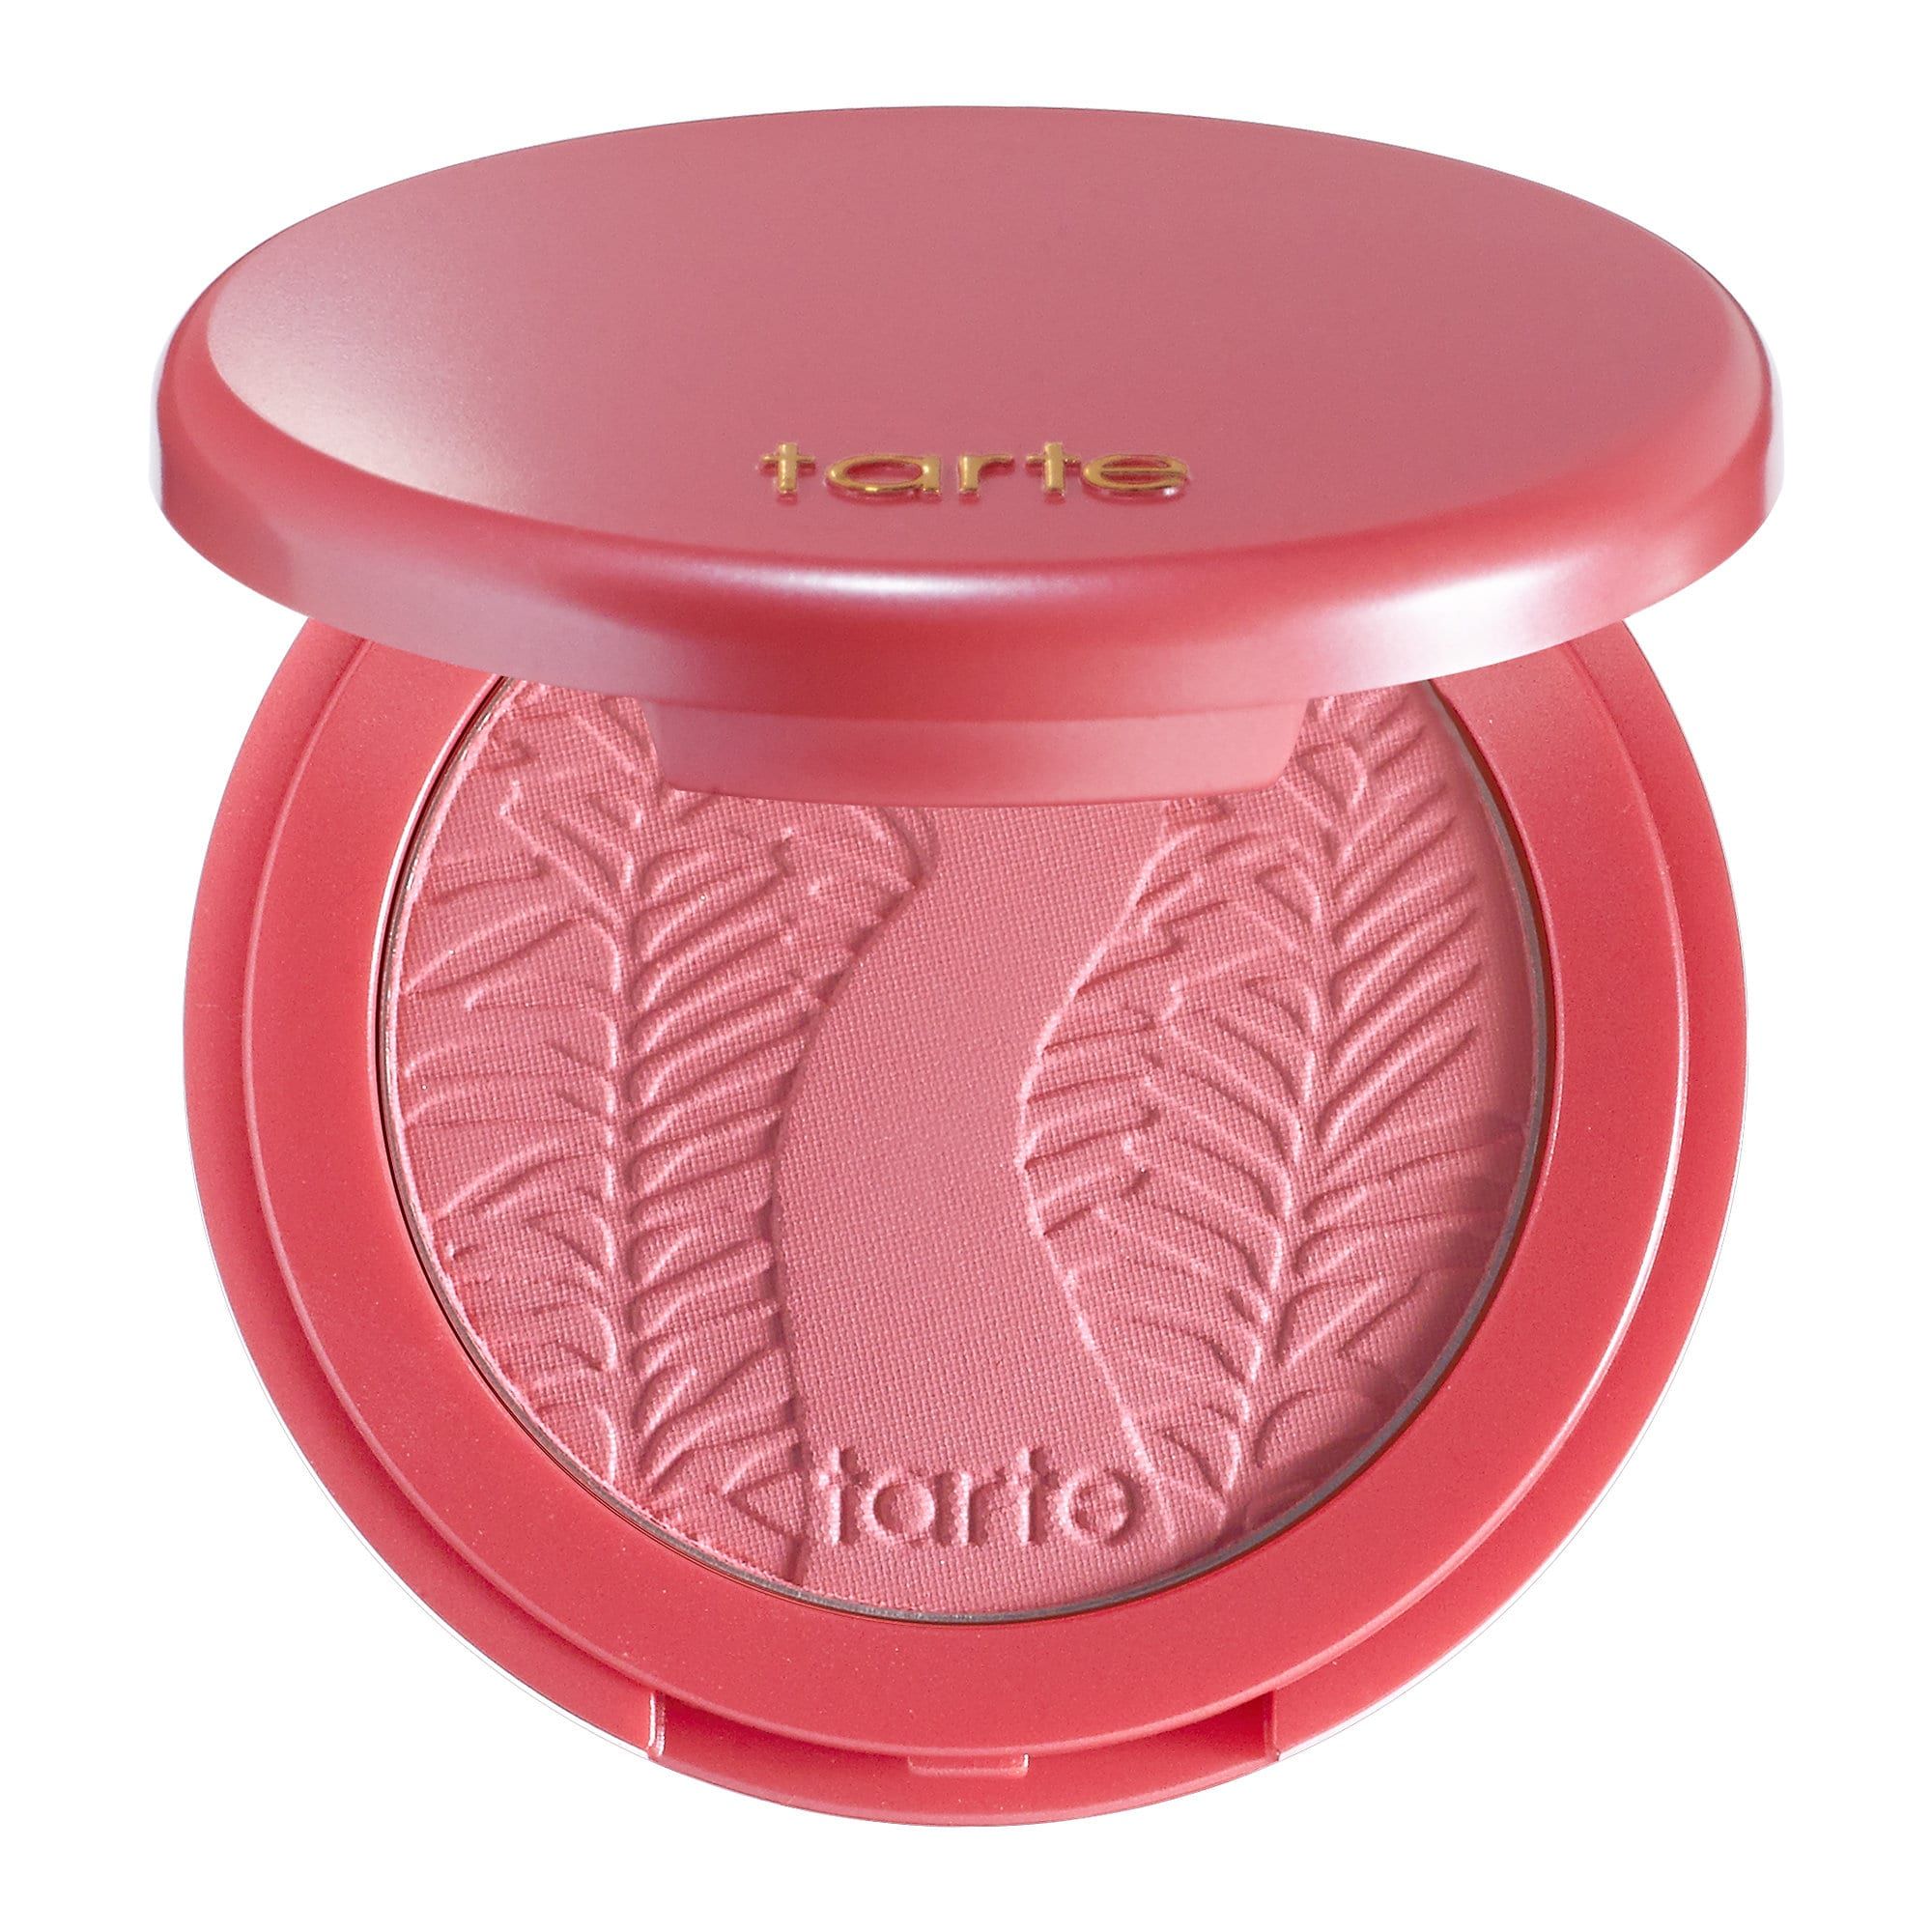 Best Blush Products To Try 2020